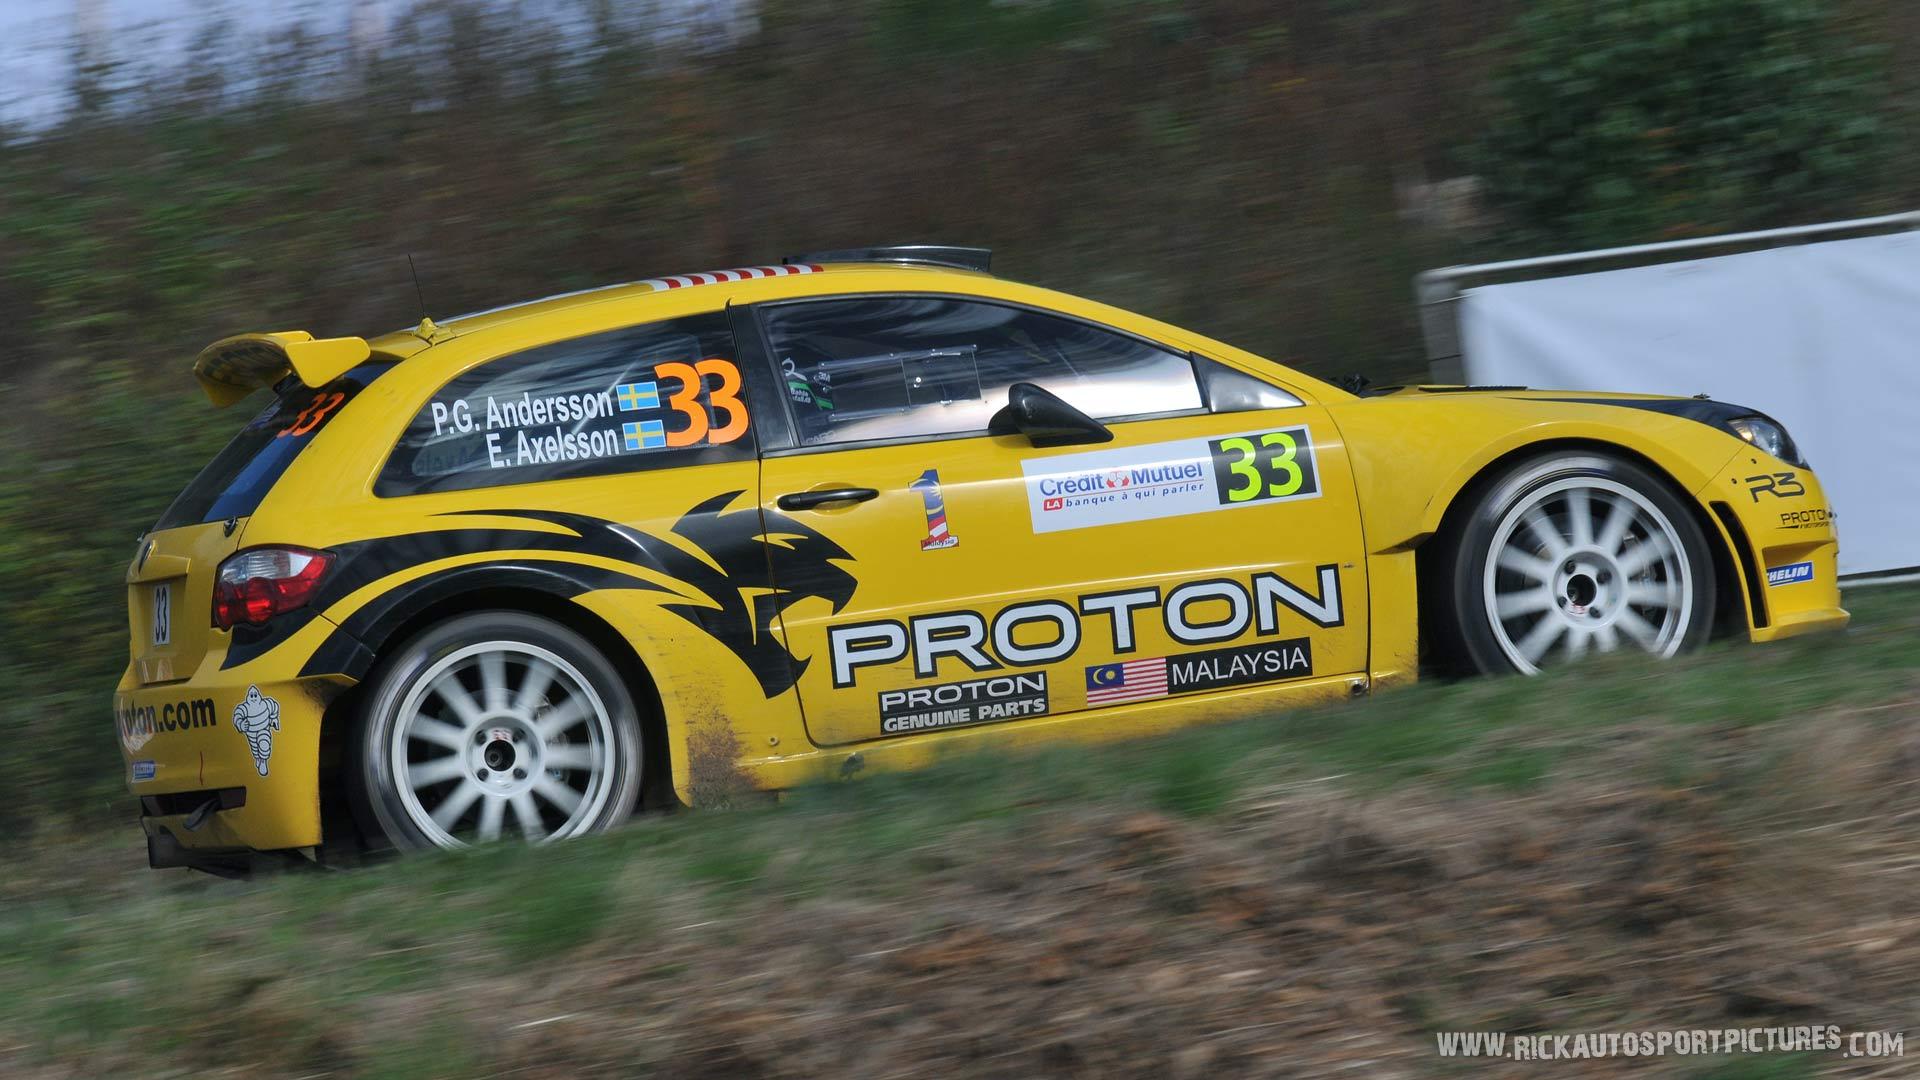 PG Andersson proton motorsports 2012